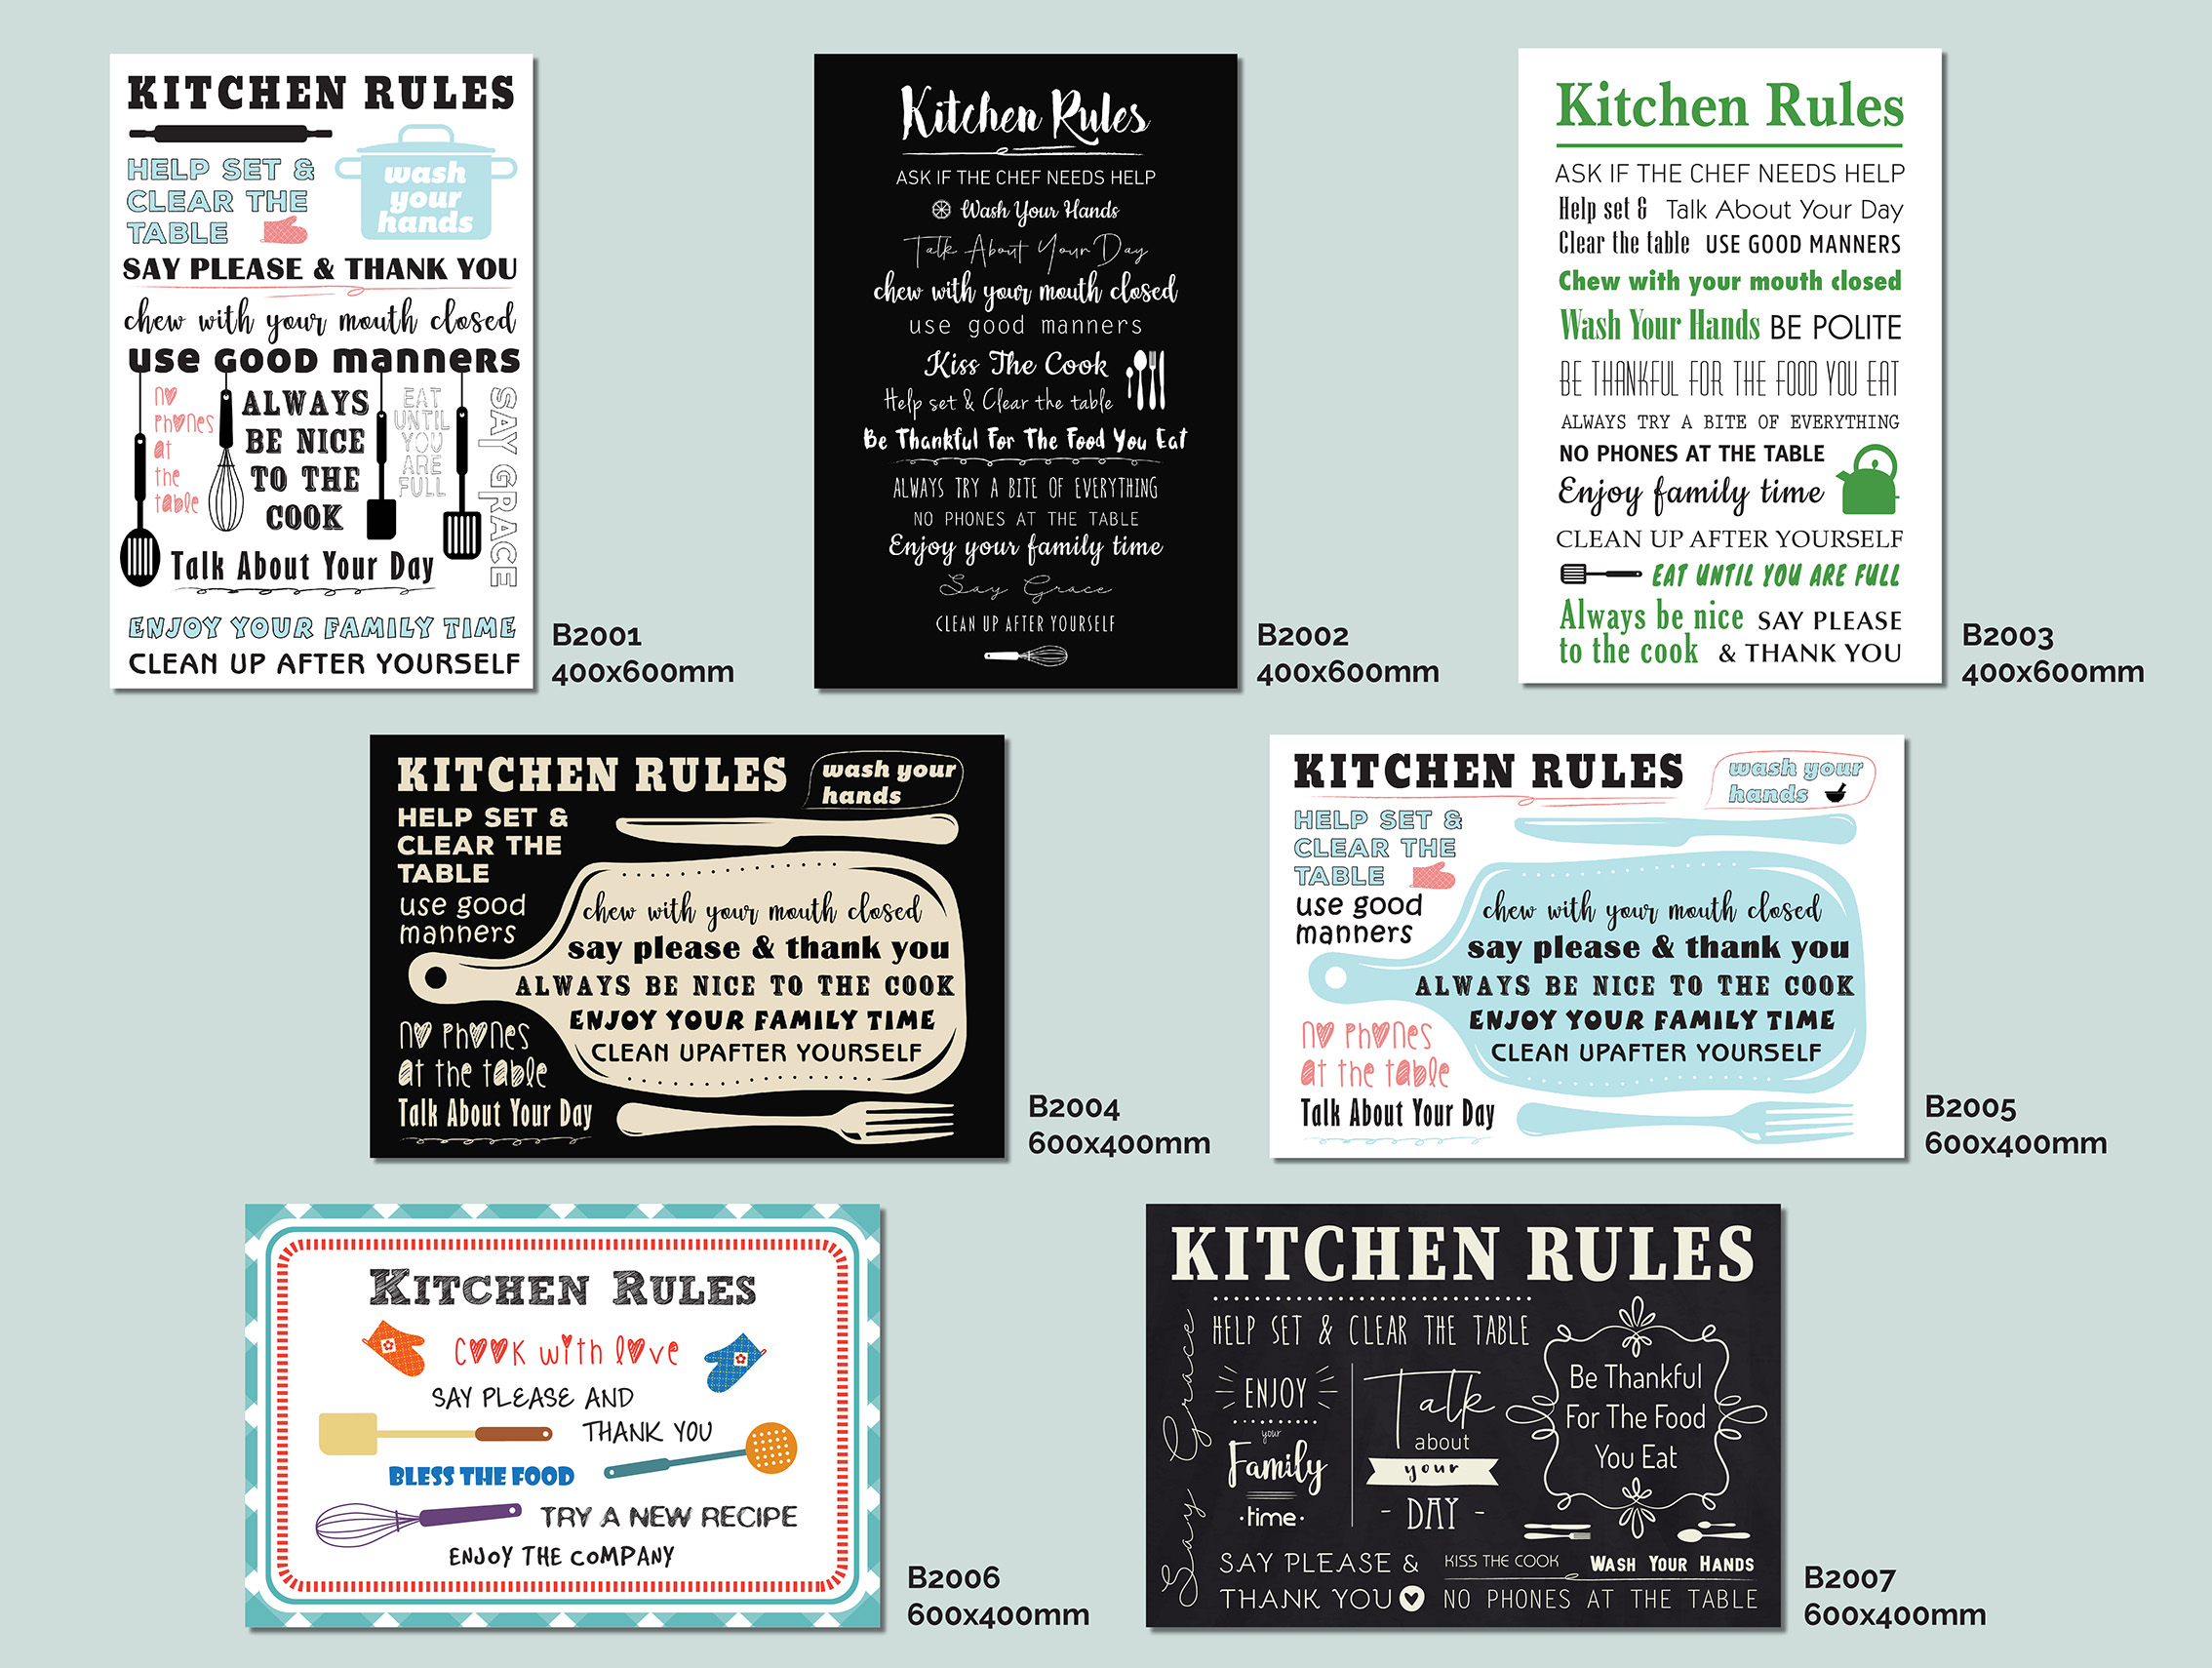 Family rules_500x1500mm